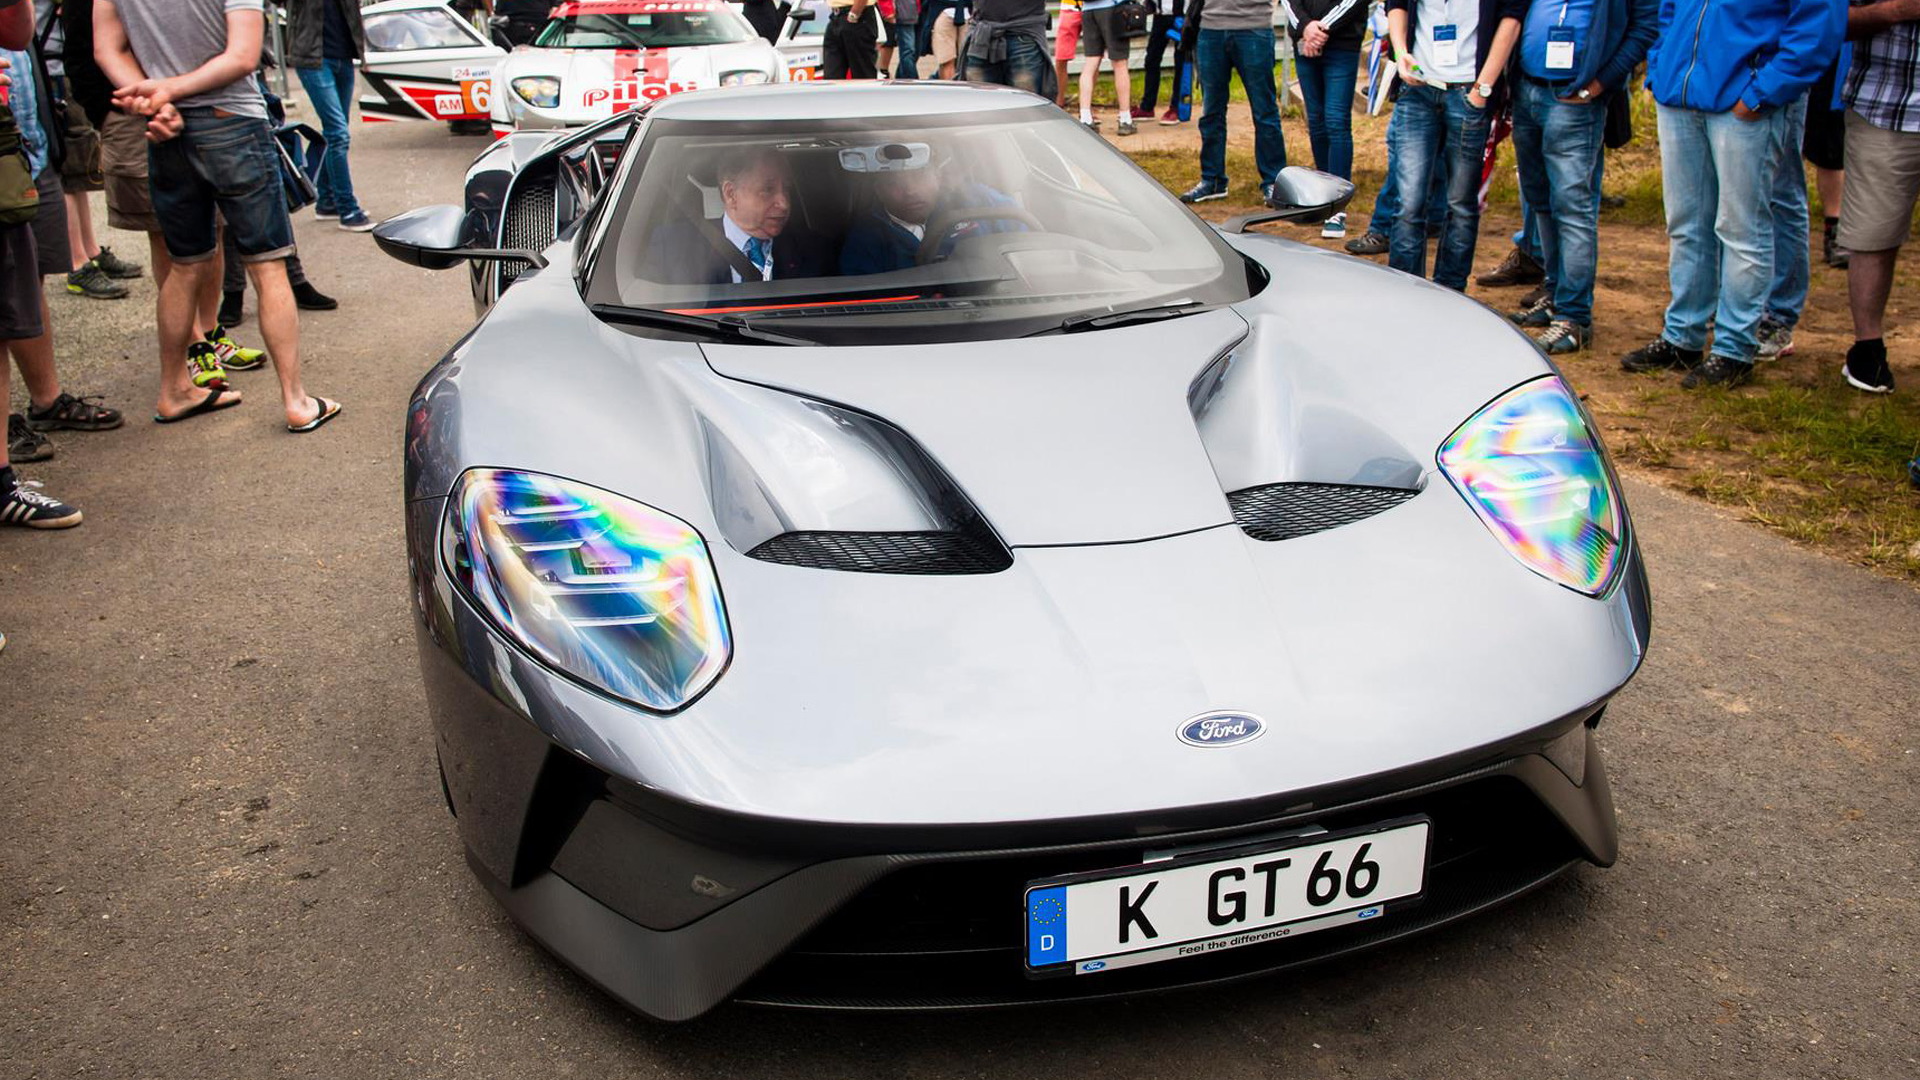 Production-spec Ford GT at the 2016 24 Hours of Le Mans